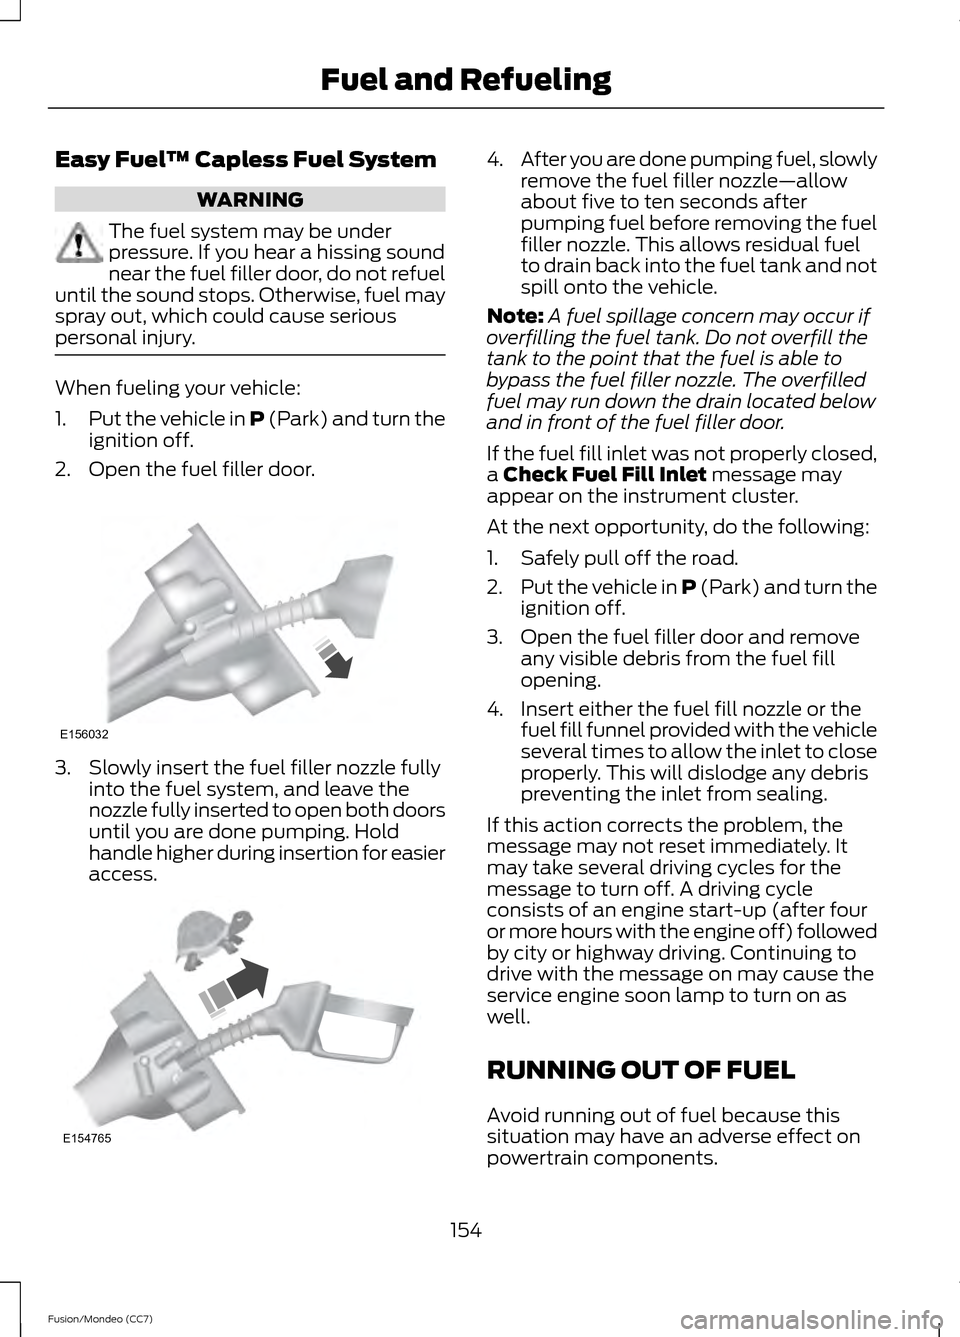 FORD FUSION (AMERICAS) 2013 2.G Owners Manual Easy Fuel
™ Capless Fuel System WARNING
The fuel system may be under
pressure. If you hear a hissing sound
near the fuel filler door, do not refuel
until the sound stops. Otherwise, fuel may
spray o